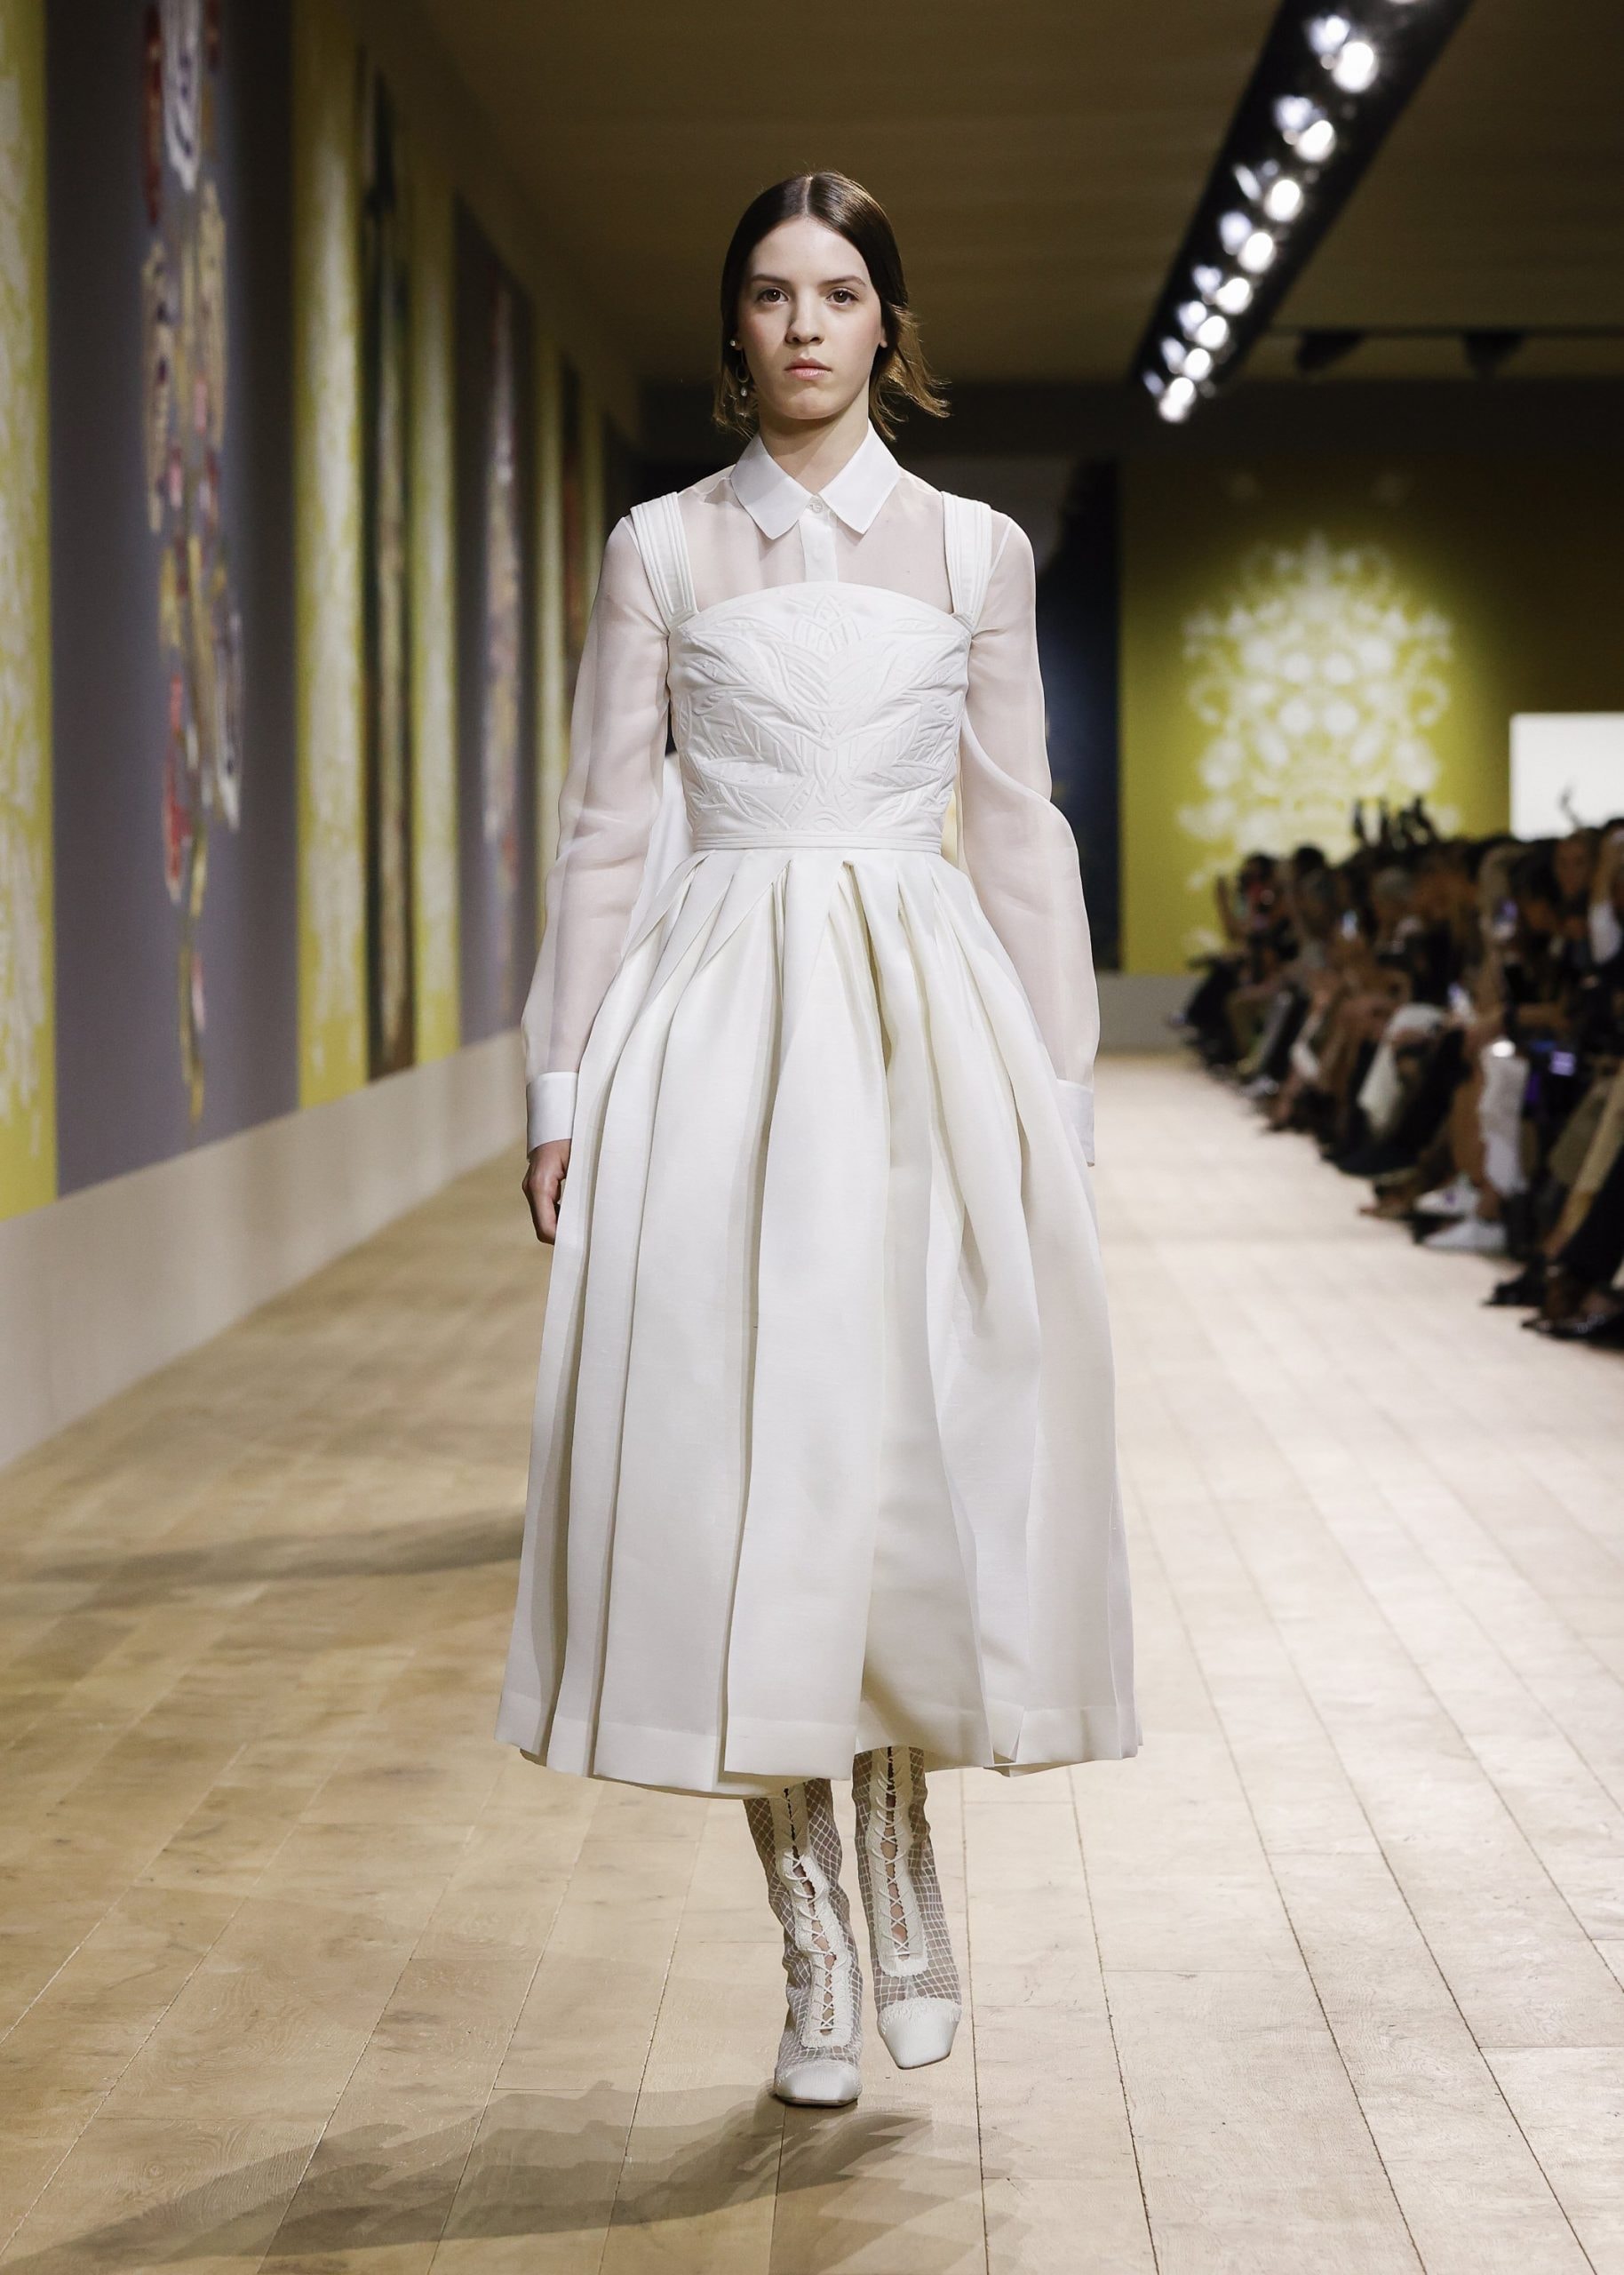 Dior 2022/23 FW Haute Couture show runway